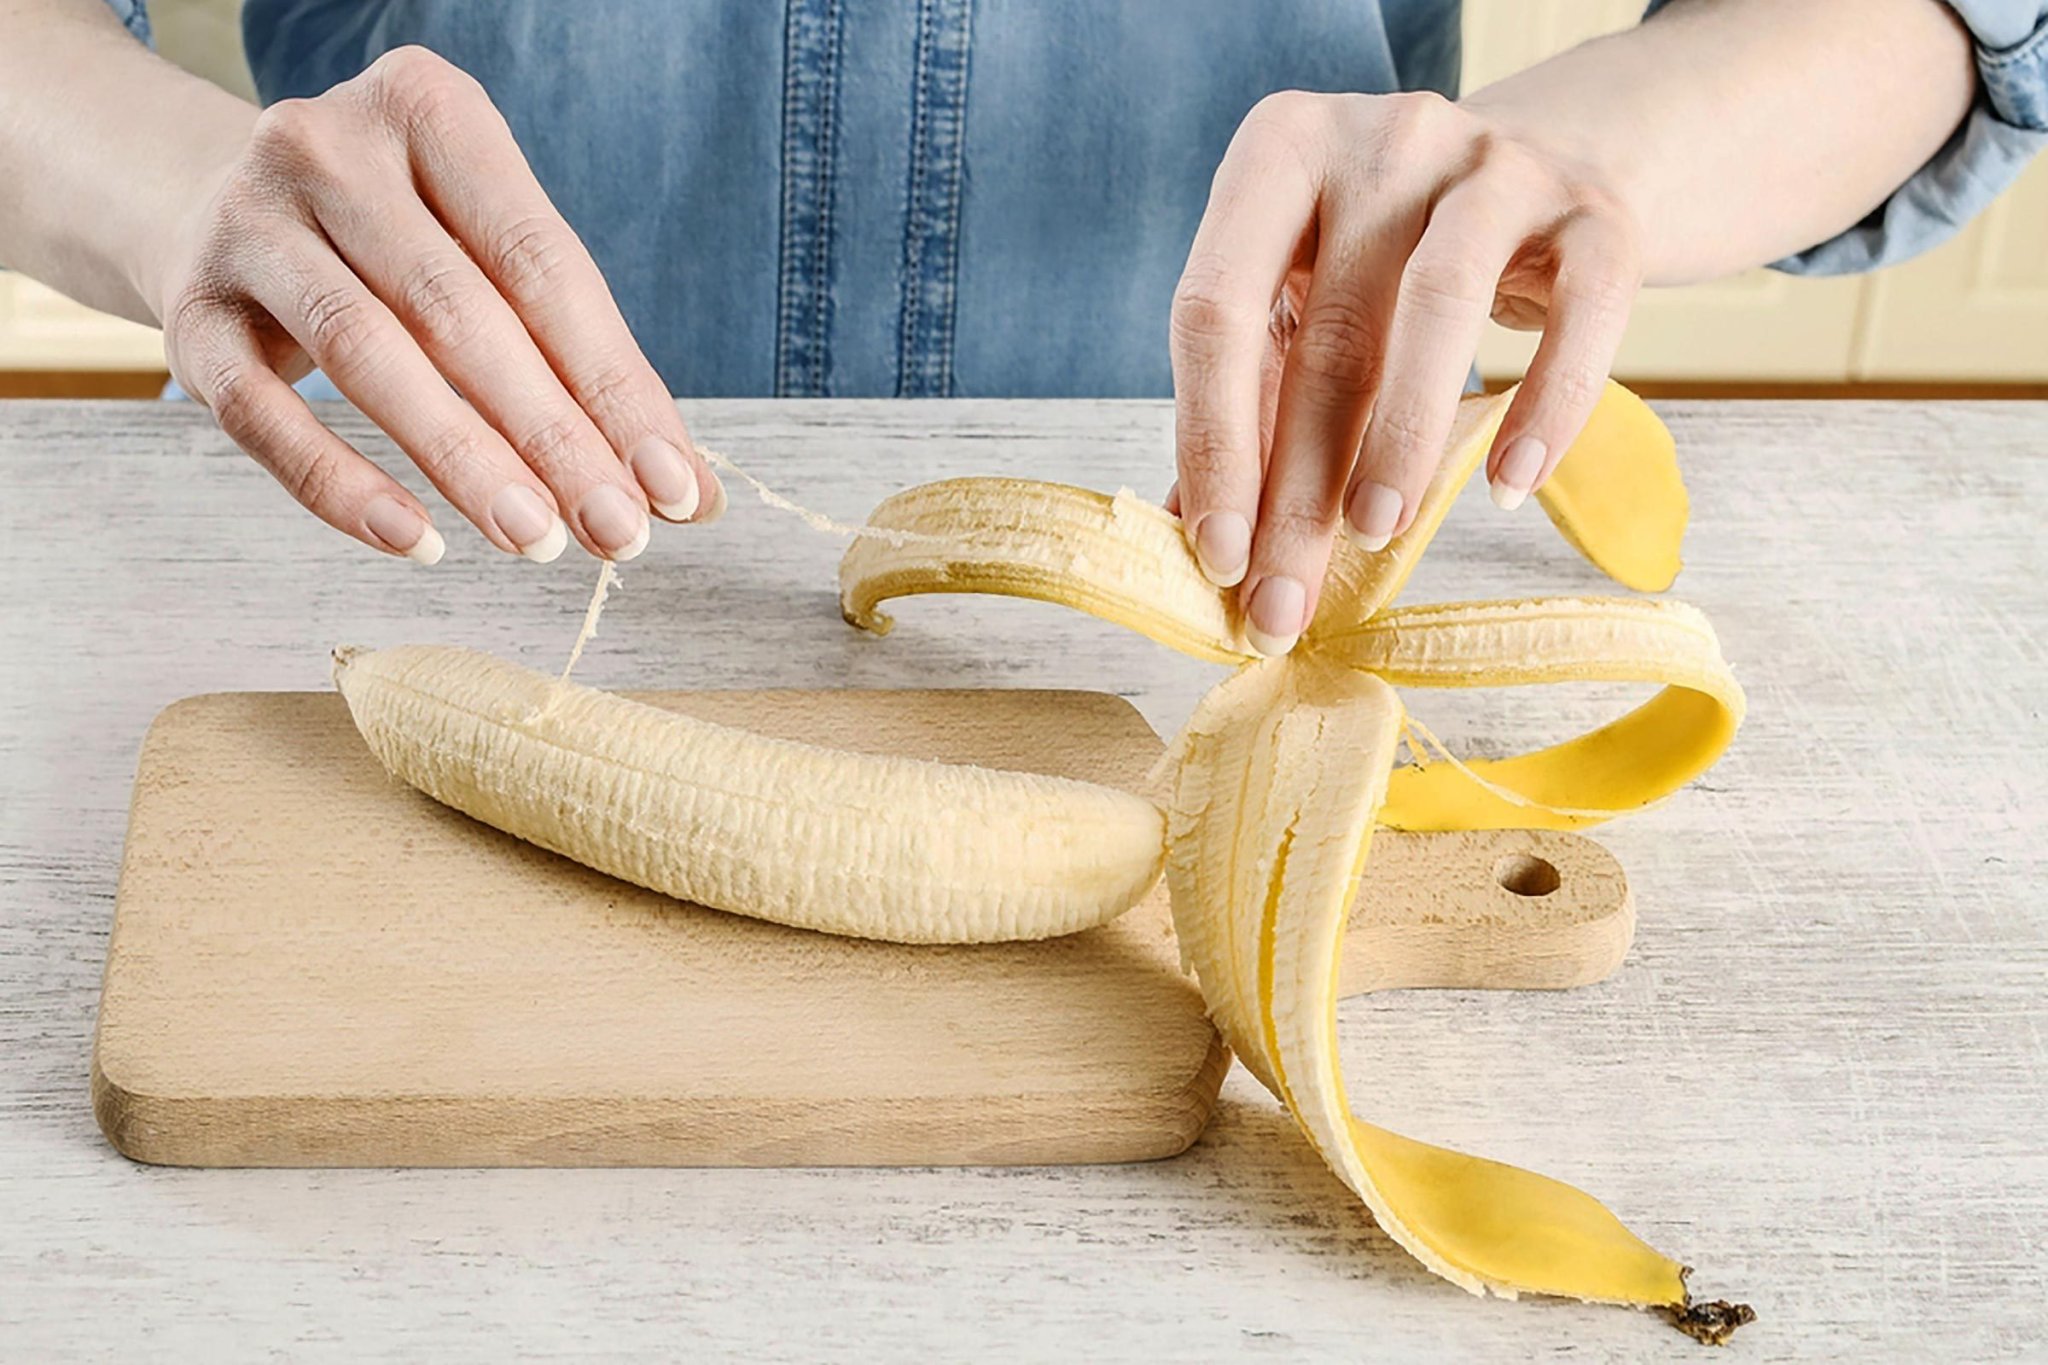 This Is Why You Shouldn’t Be Throwing Out Those Banana “Strings”